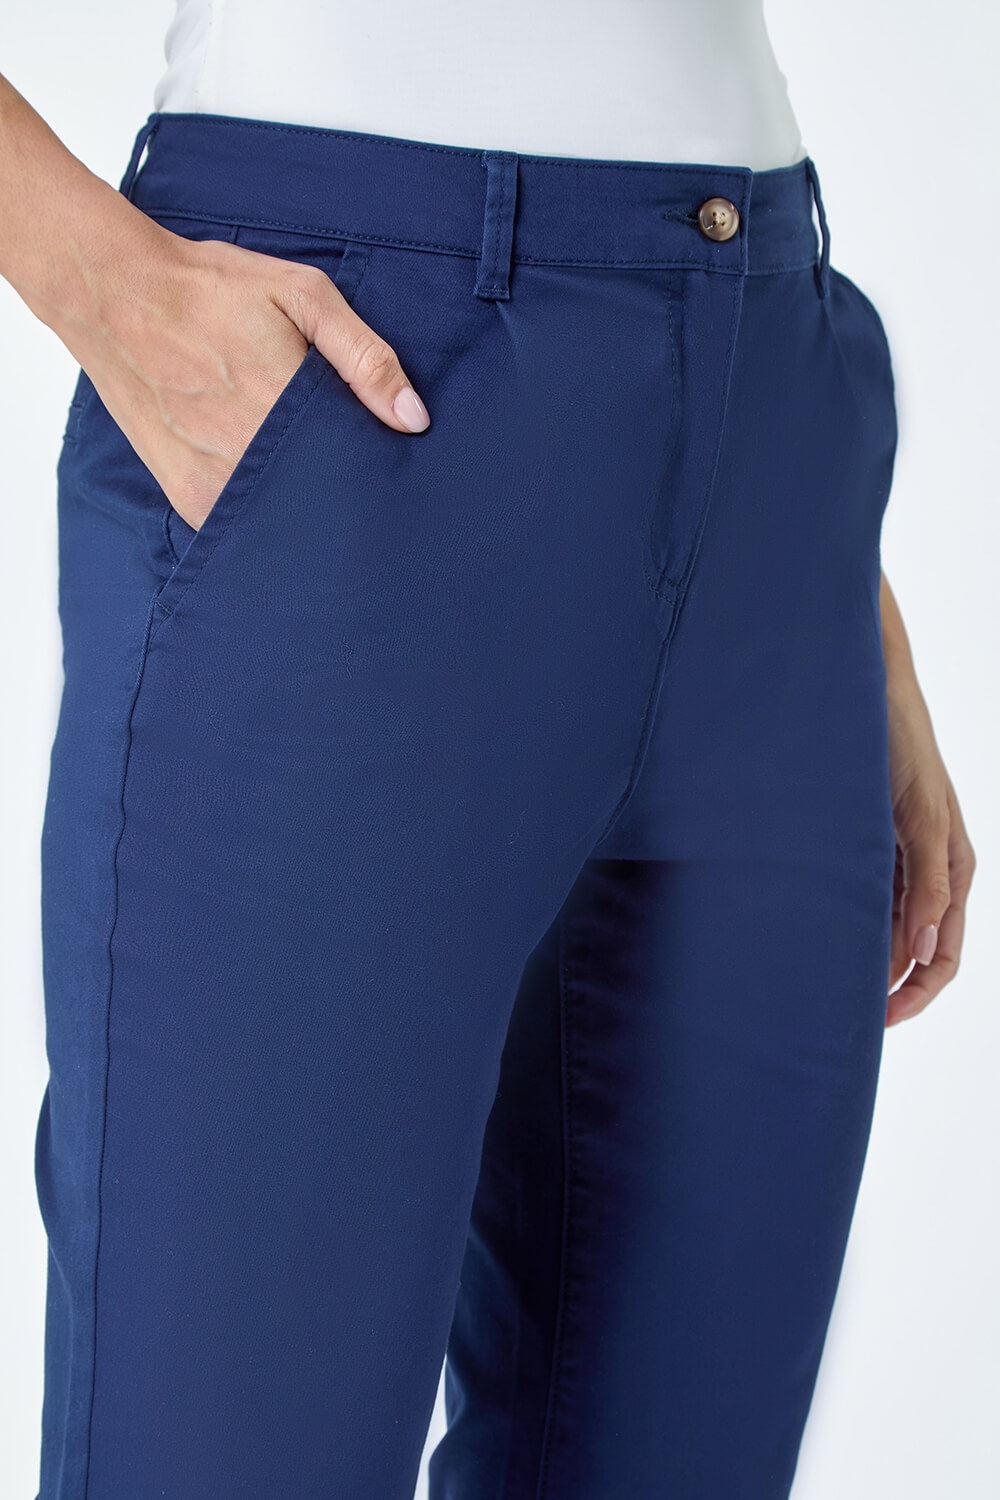 Navy  Cotton Blend Washed Chino Trousers, Image 5 of 5